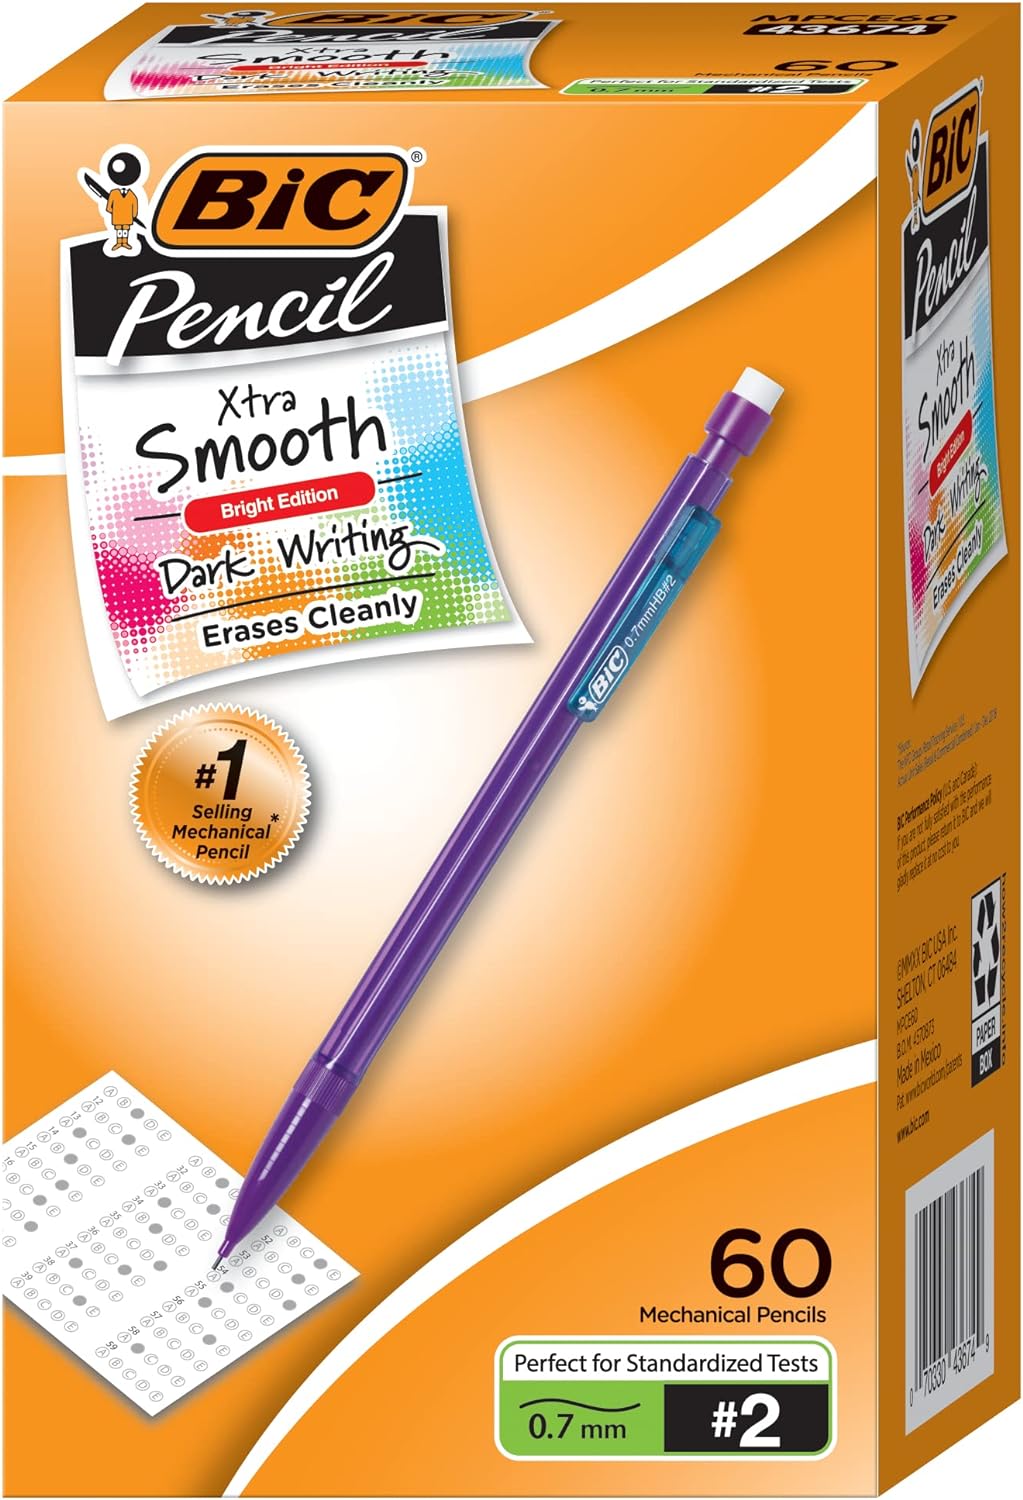 Don't waste your money on some fancy metal pencil that you'll lose. Buy this instead. I bought this to put in my school locker because I get pencils stolen easily, came in a nice small box that fit perfectly into my locker, I just grab one and go, cheap, high quality, and high quantity!